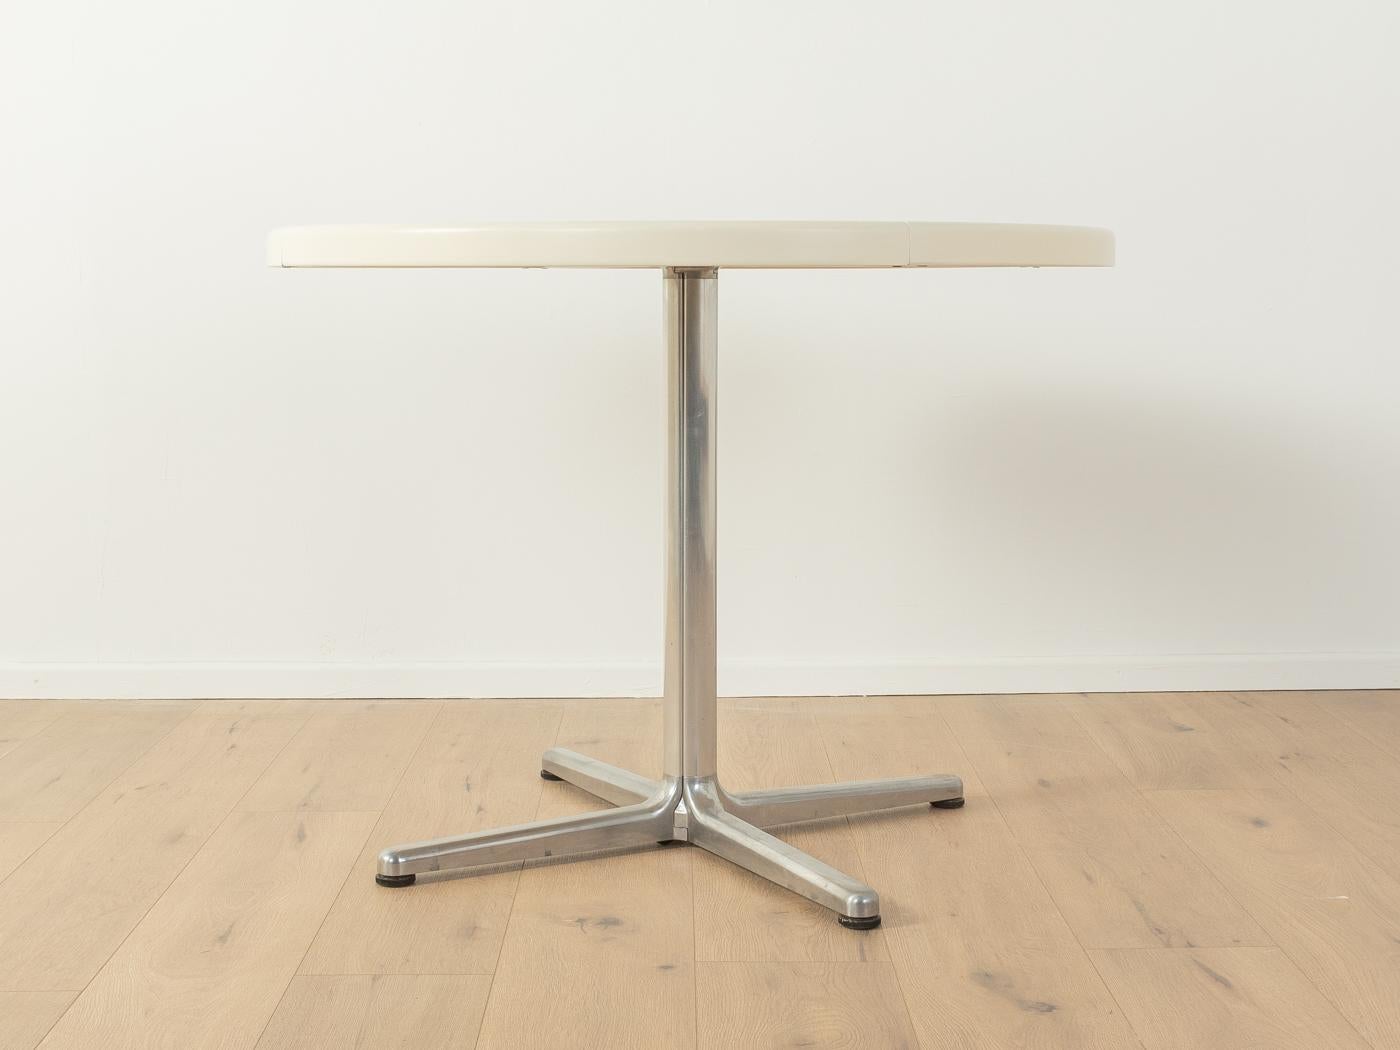  PLANO folding table, Giancarlo Piretti  In Good Condition For Sale In Neuss, NW